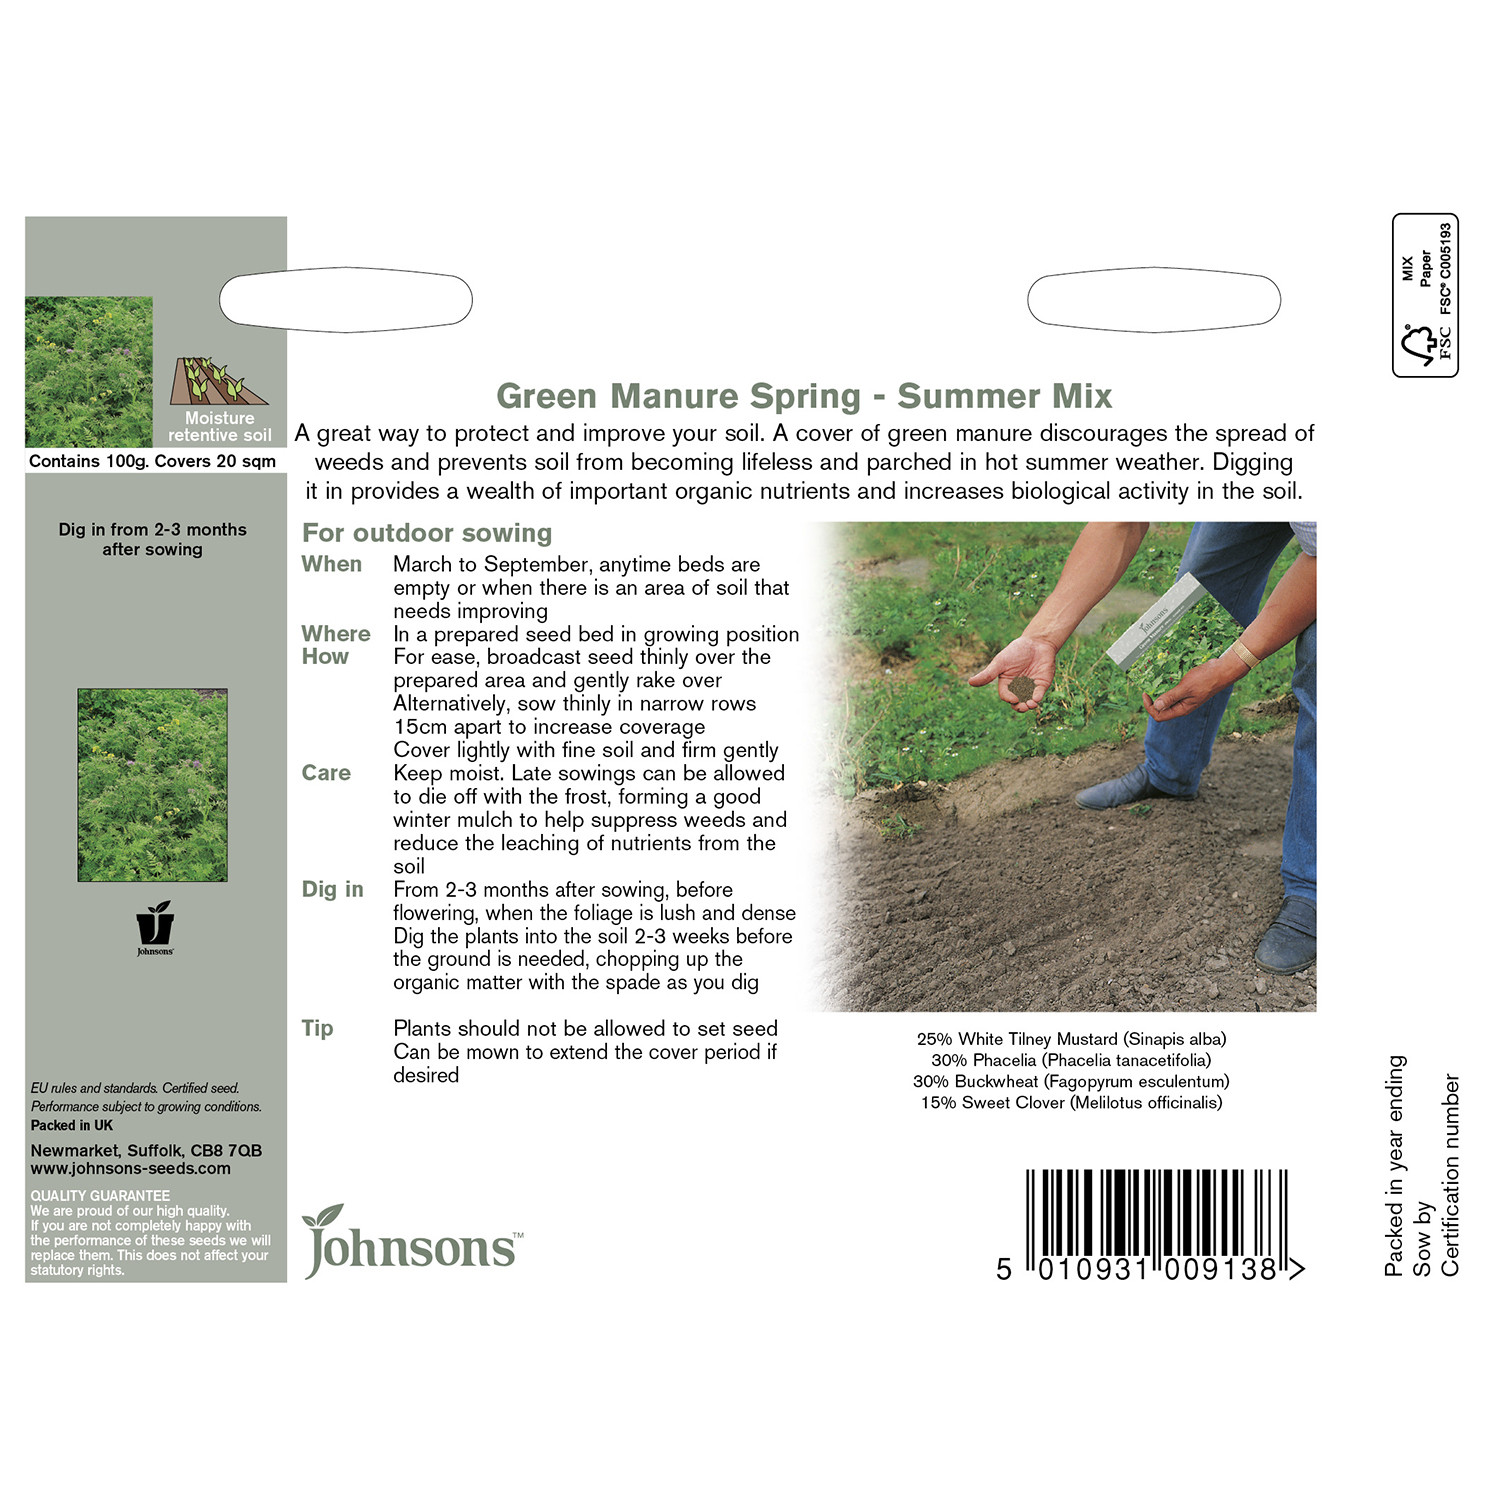 Pack of Summer Mix Green Manure Spring Image 2